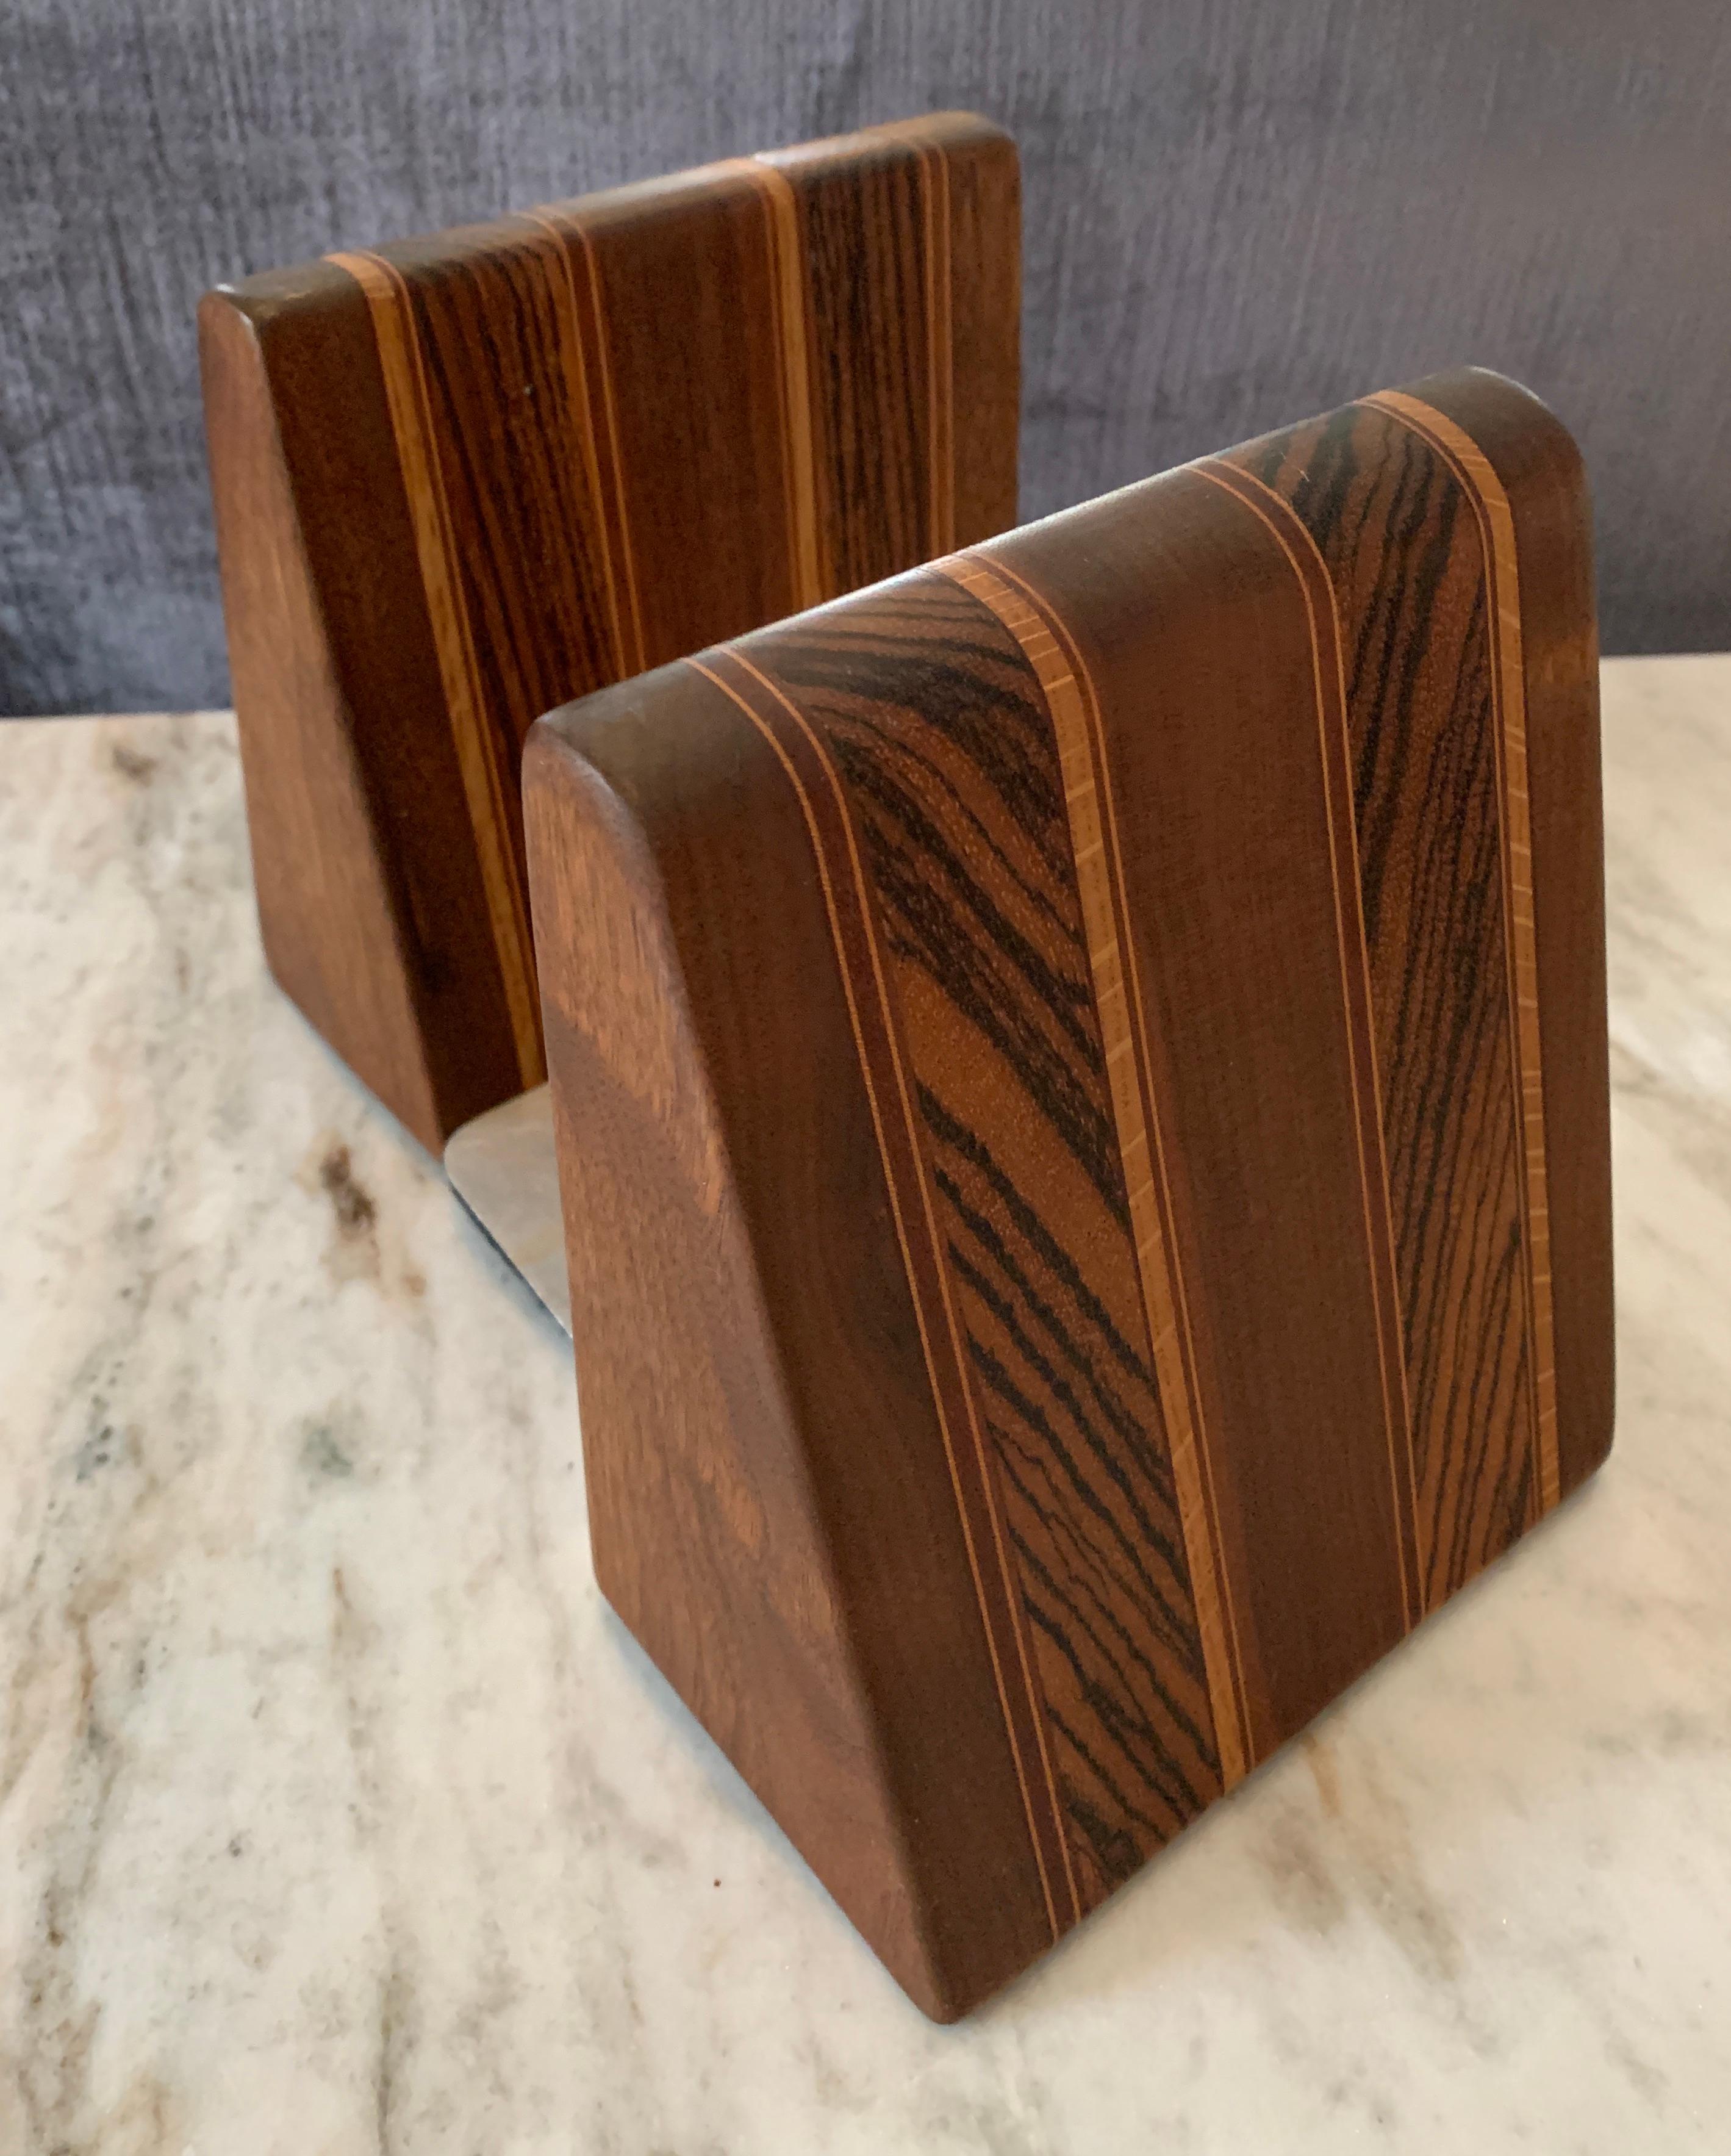 Mid-Century Modern Angular Inlay Patterned Wooden Bookends with Metal Slide